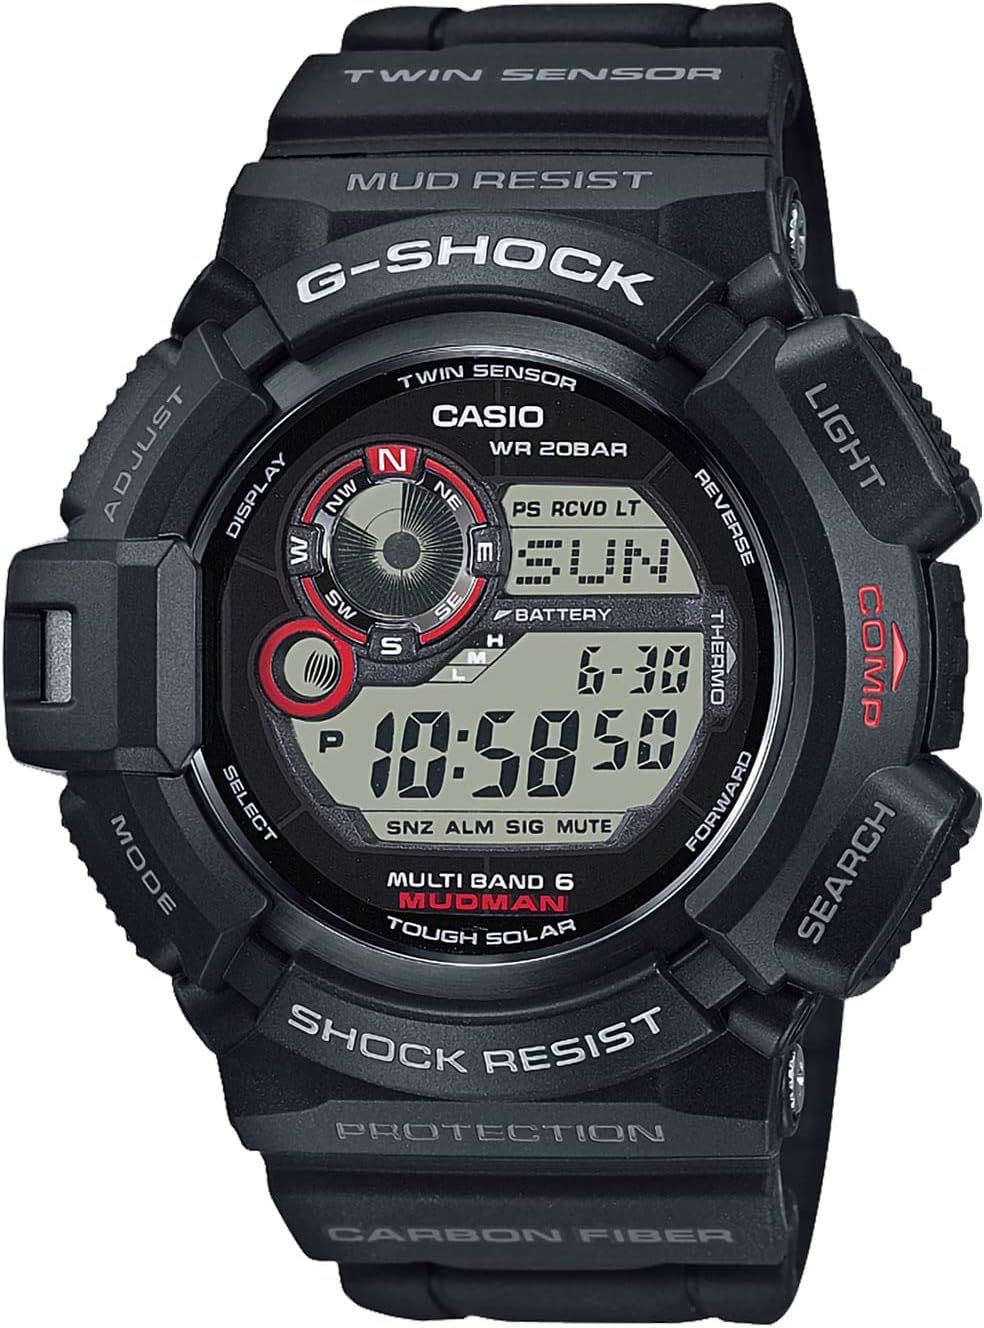 Conquer the Elements with Casio G-Shock Mudman GW-9300-1JF - The Rugged Timekeeper!